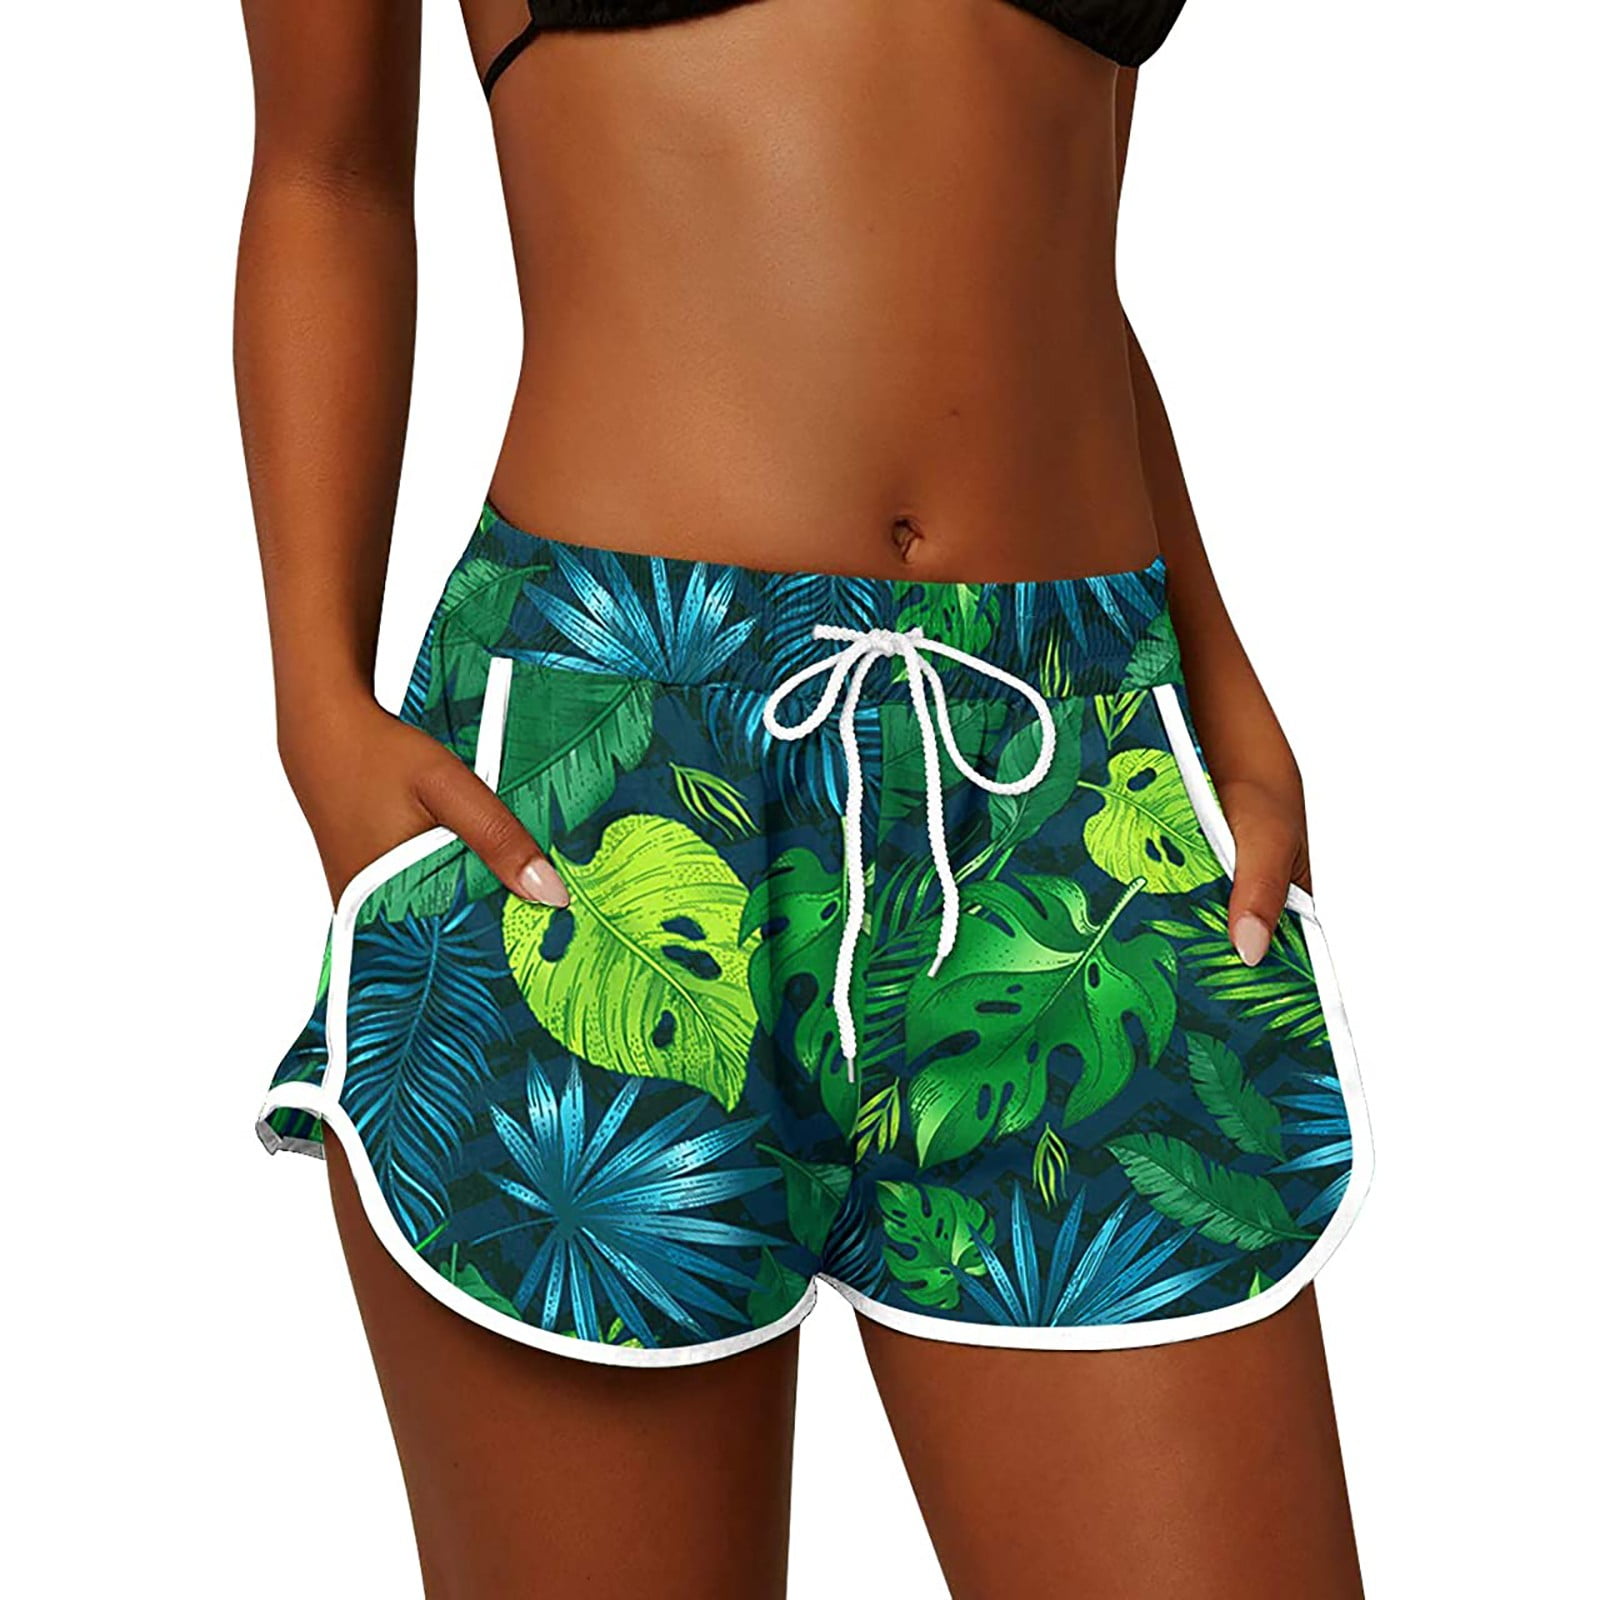 Womens Beach Surfing Boardshorts Swimming Trunks Palm Animal Prins Textures Shorts